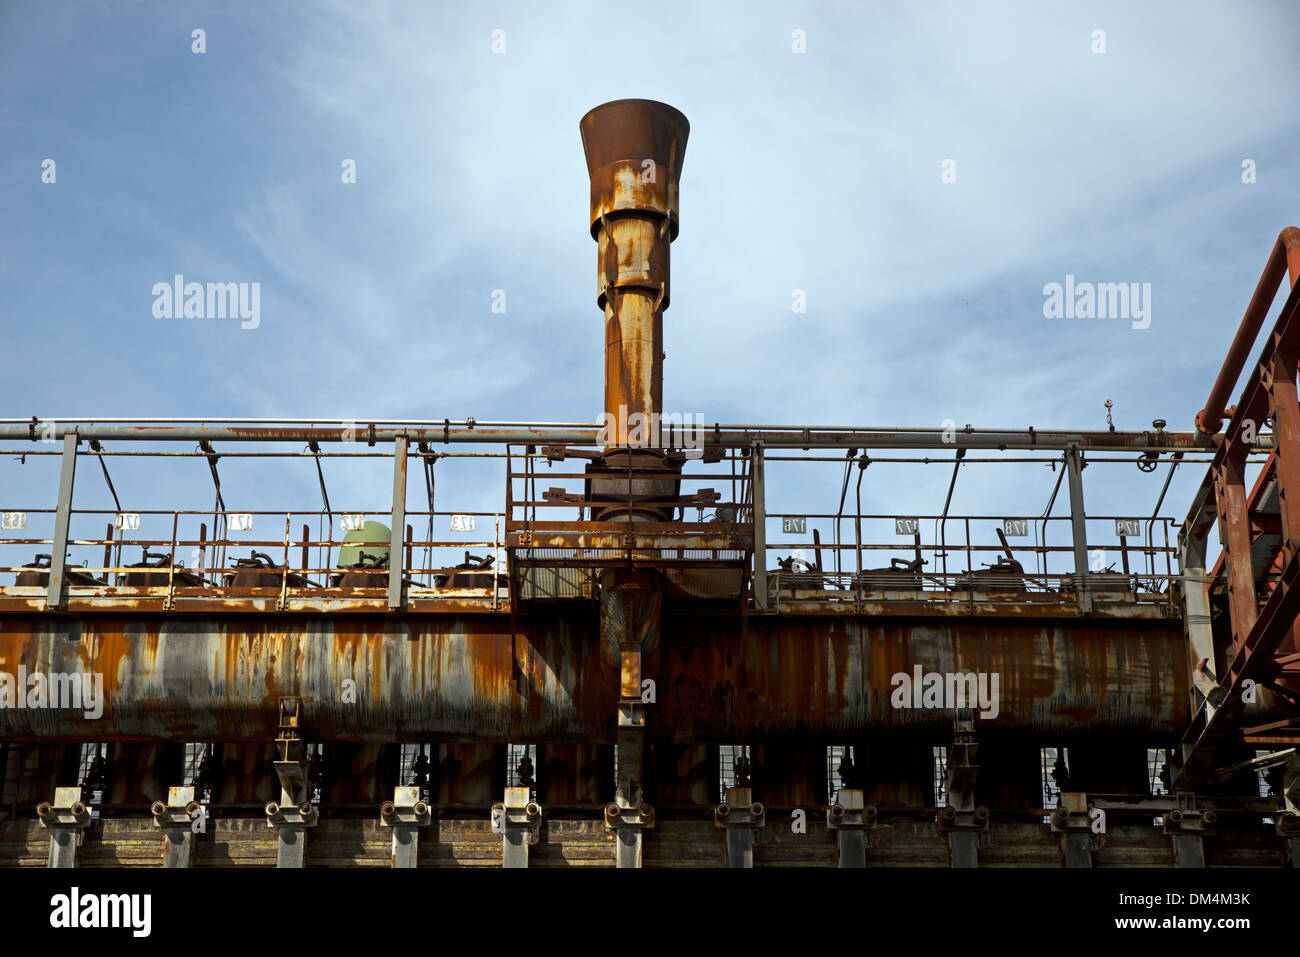 outside mining mine German Germany former Essen Europe pit industry industrial complex industrial monument industrial history Stock Photo